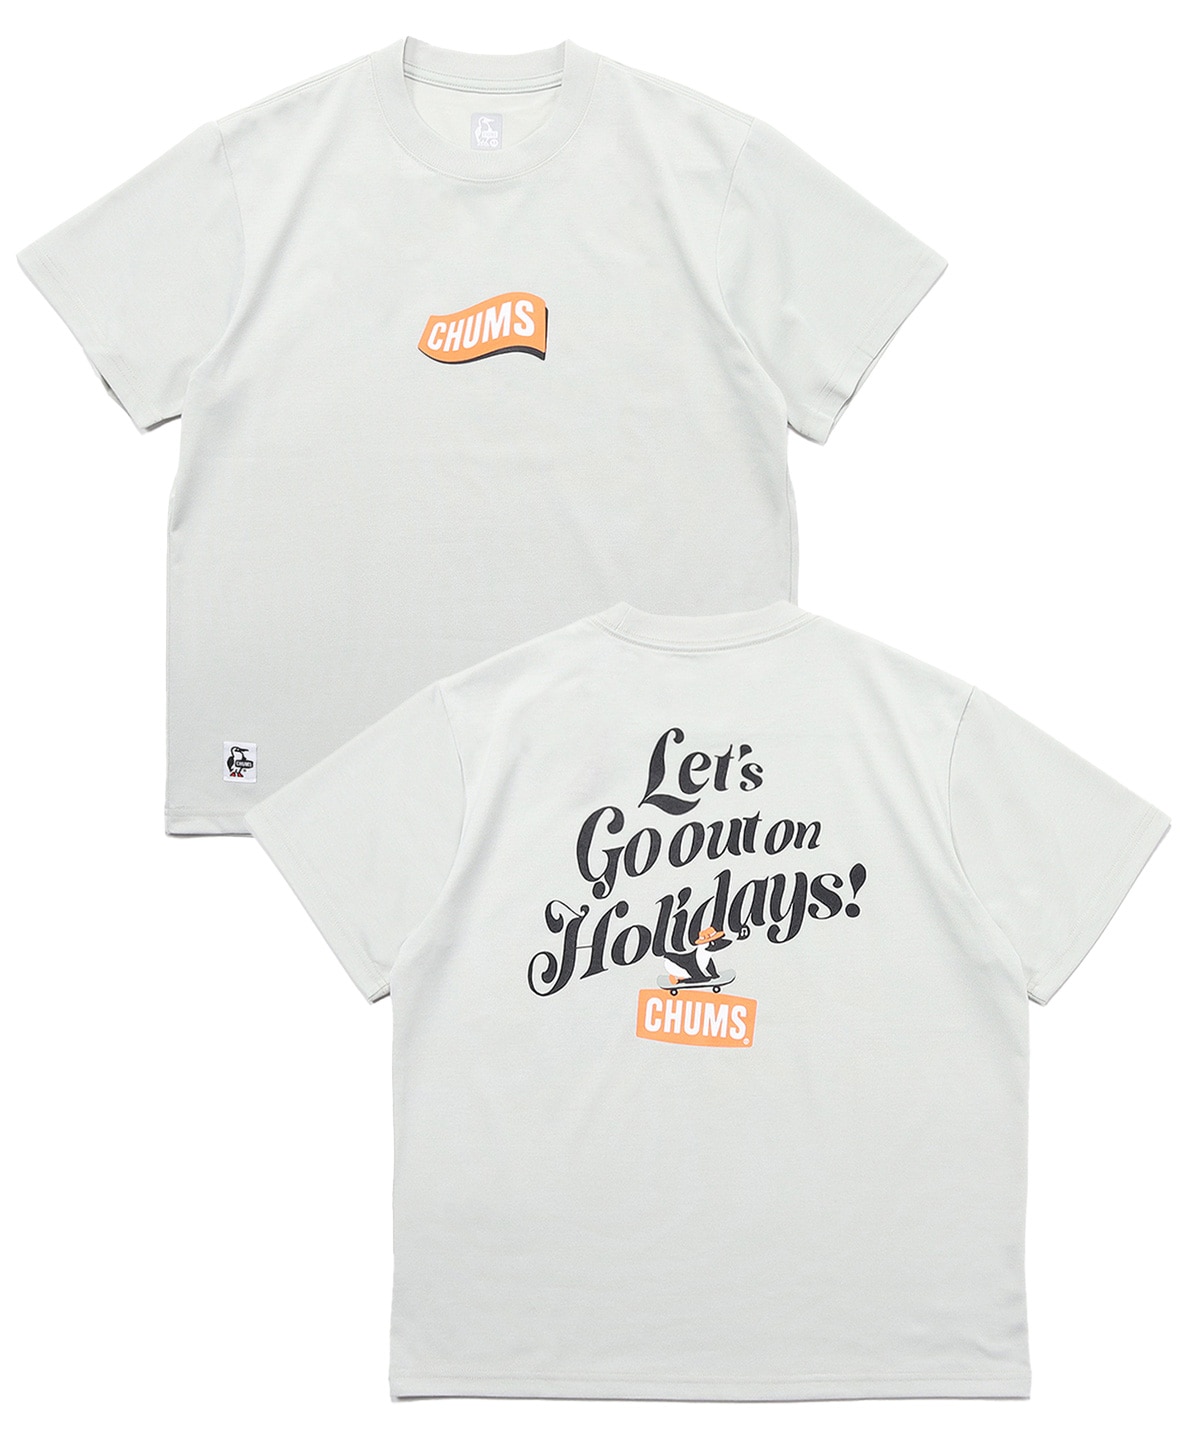 Let's Go out on Holidays! Work Out Dry T-Shirt(レッツゴーアウトオンホリデーズ！ワークアウトドライTシャツ(トップス/Tシャツ))